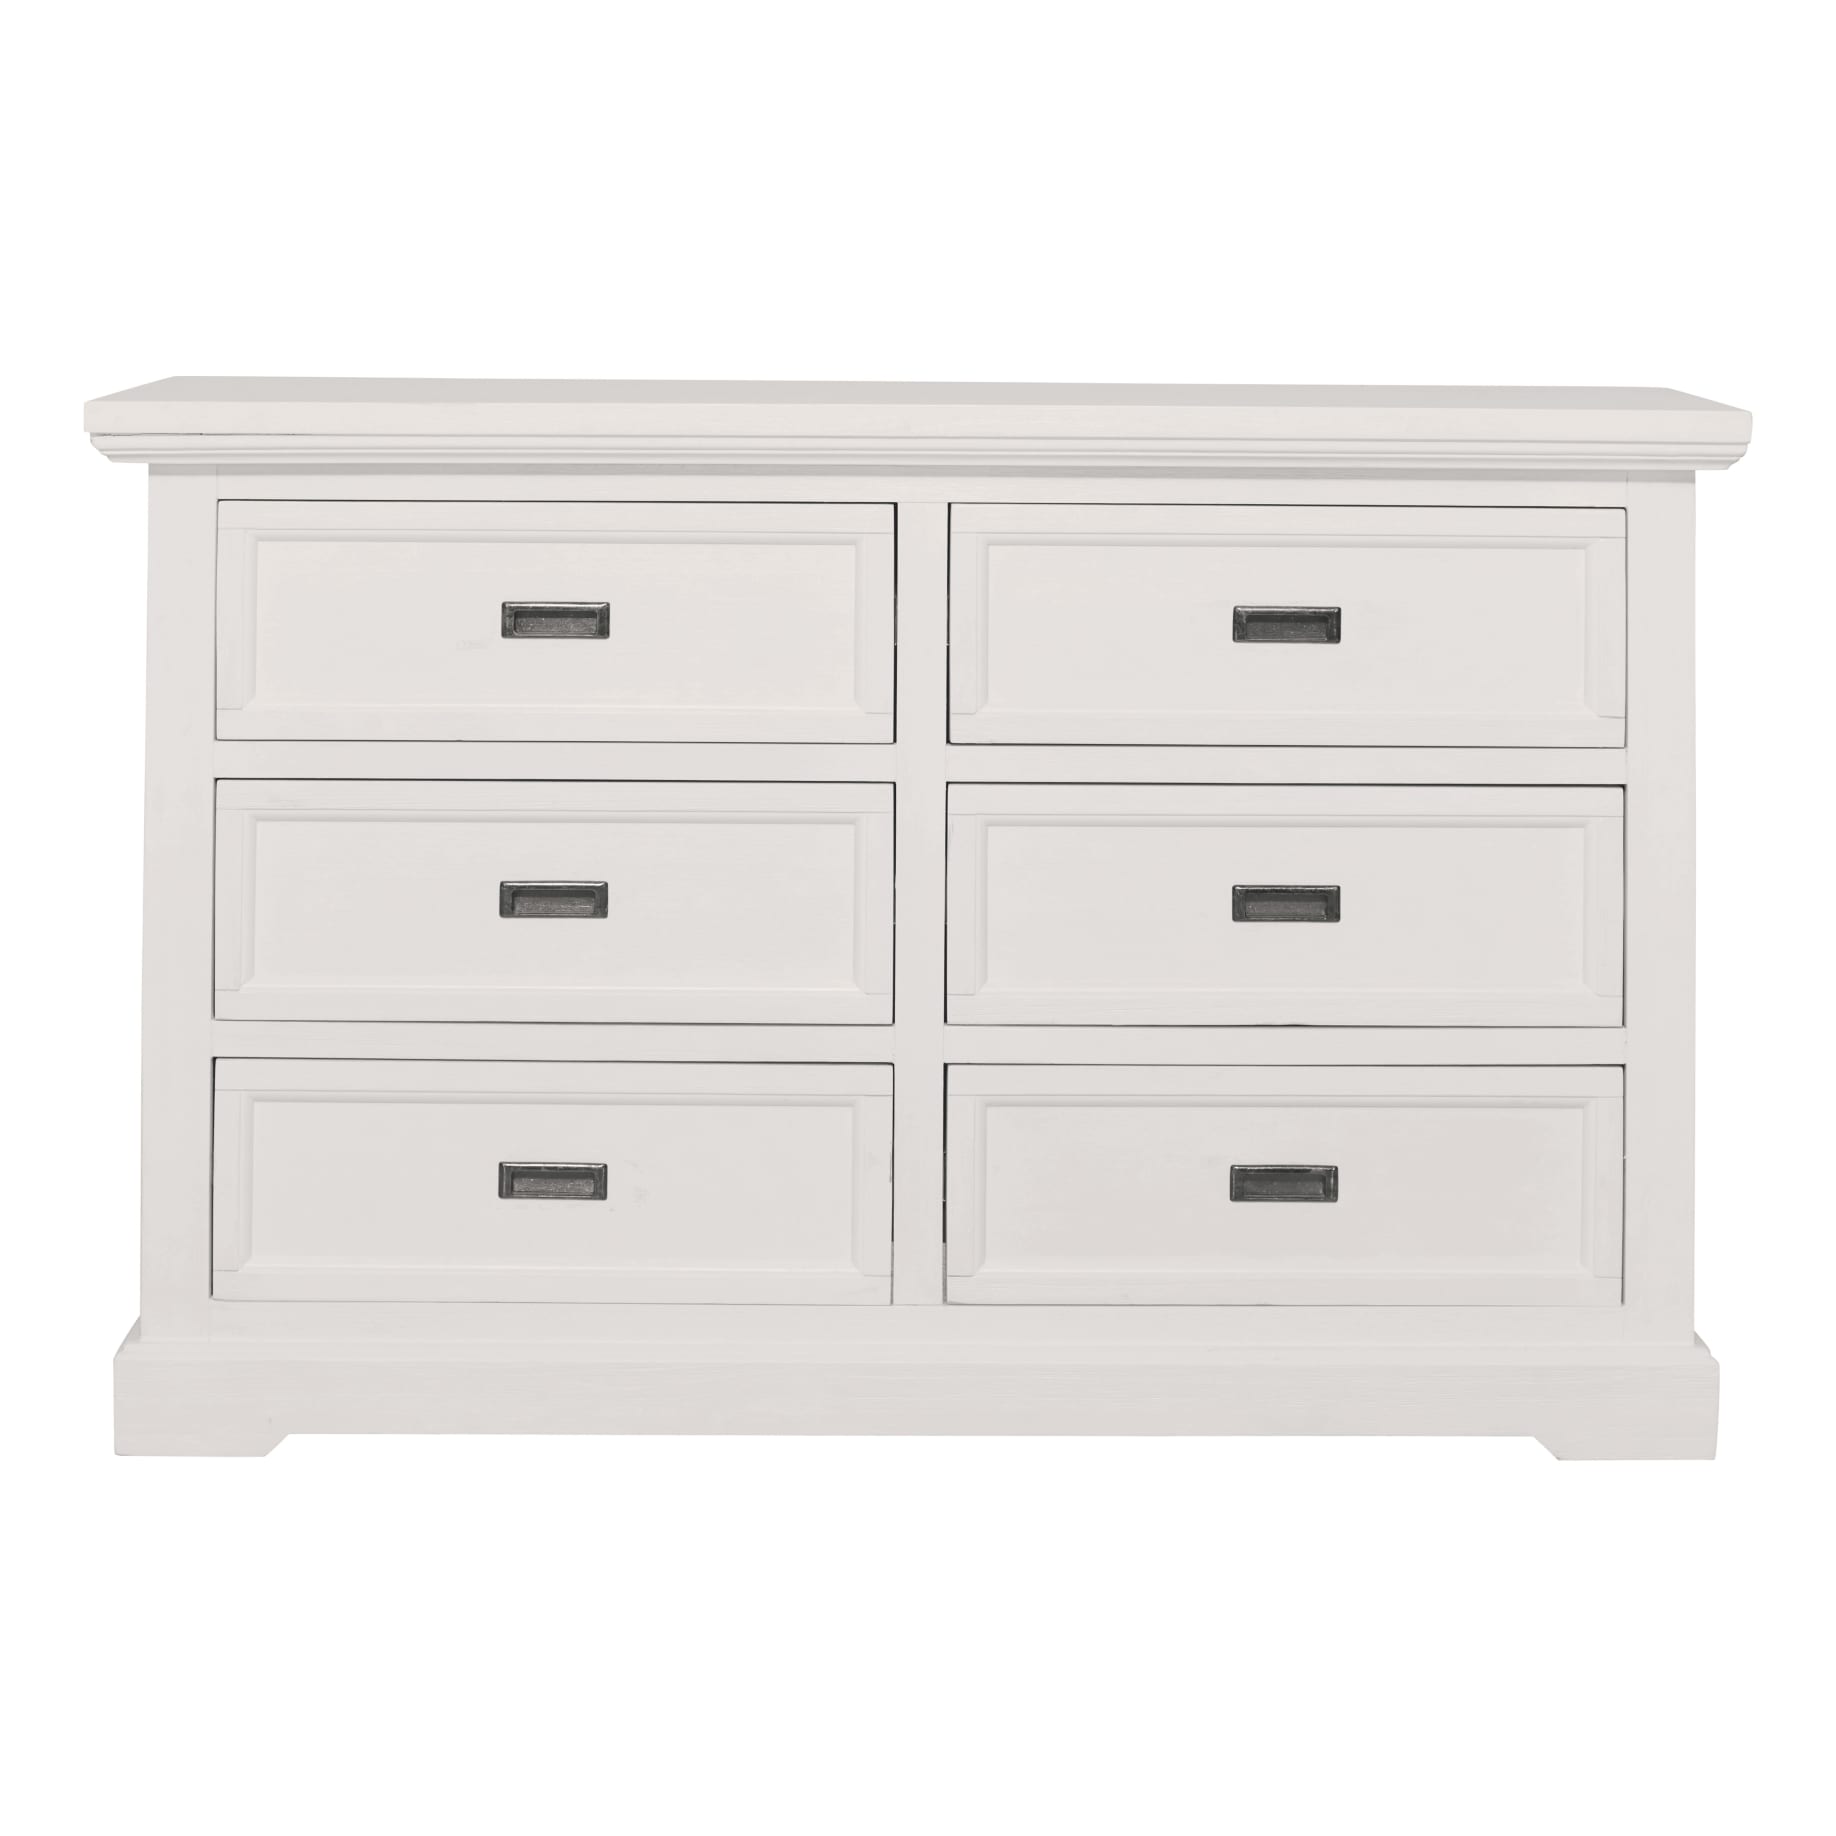 Hamptons 6 Drawer Dresser Only in Acacia White